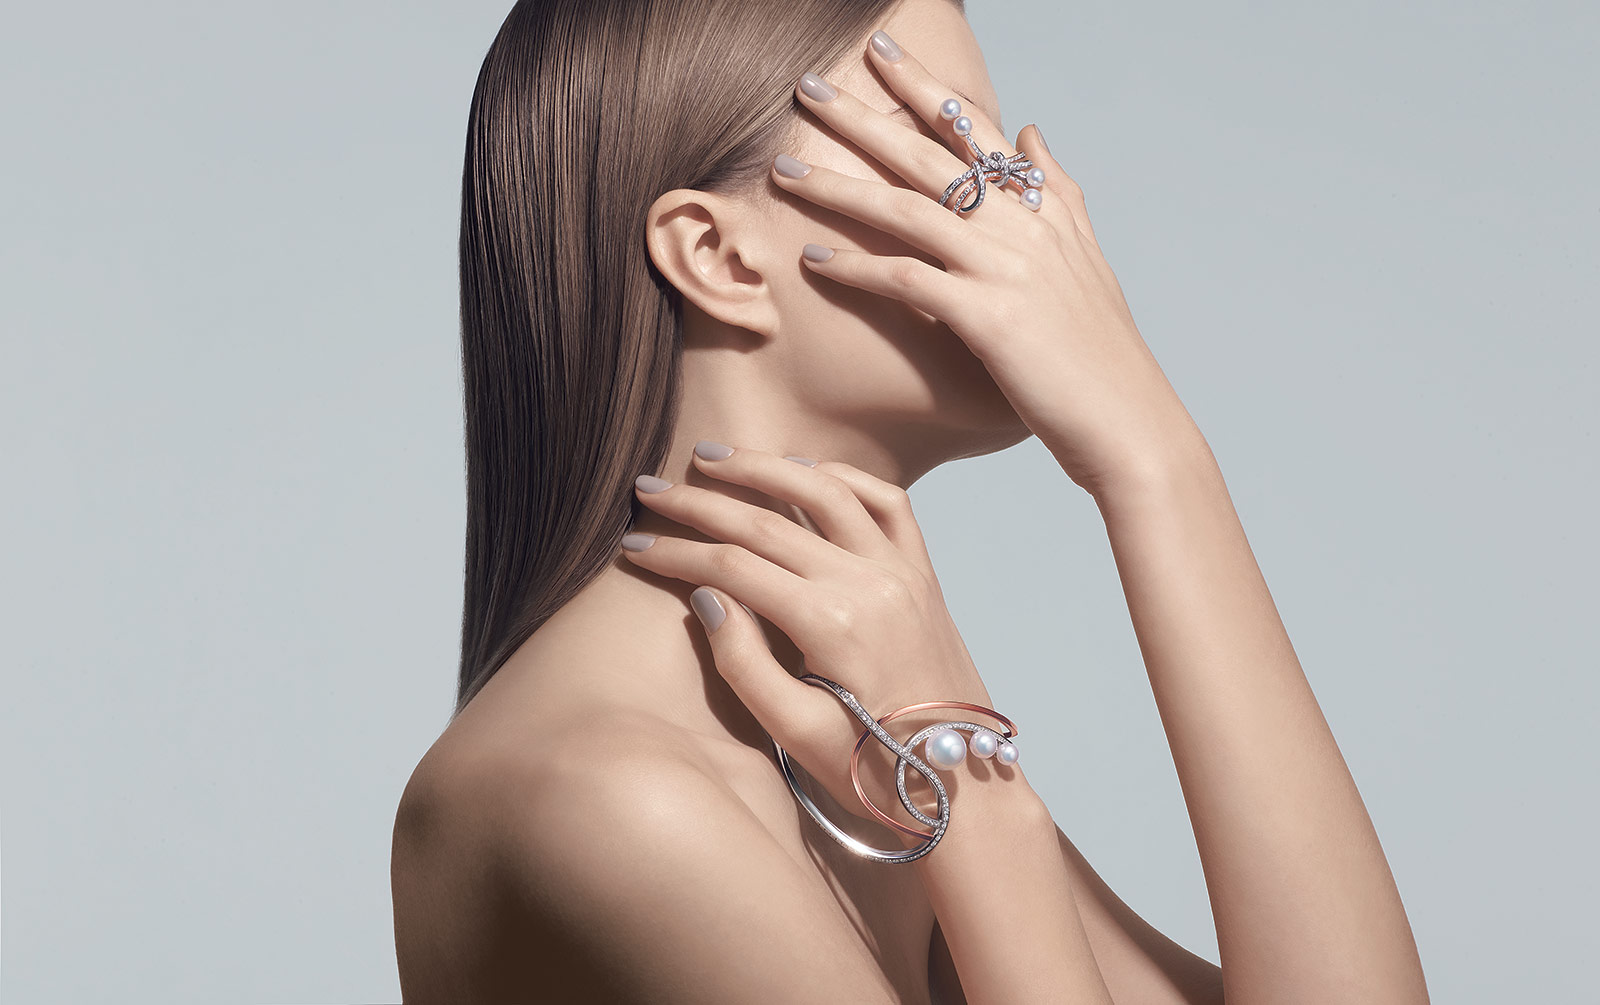 TASAKI Atelier 'Nacreous' double finger ring and hand cuff from the 'Surrealism' collection with diamonds, Akoya pearls and South Sea pearls in 18k white gold and SAKURAGOLD(TM)